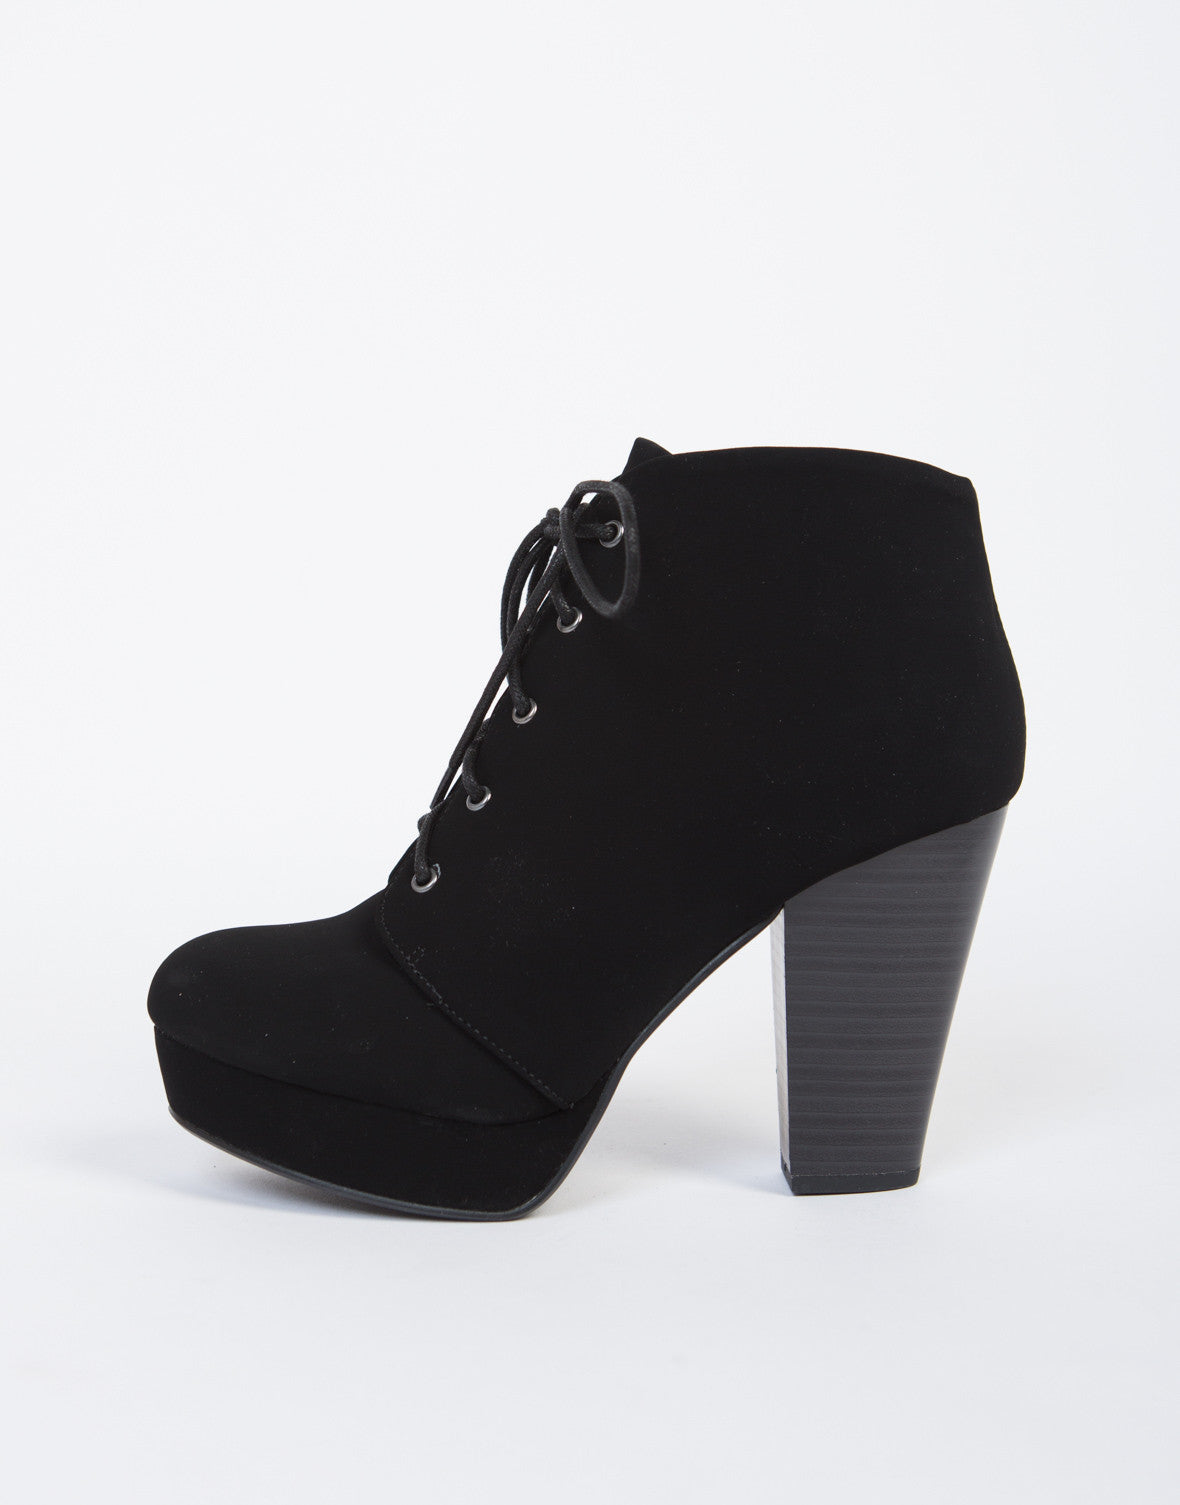 Lace-Up Platform Booties - Black Lace Up Ankle Booties – 2020AVE